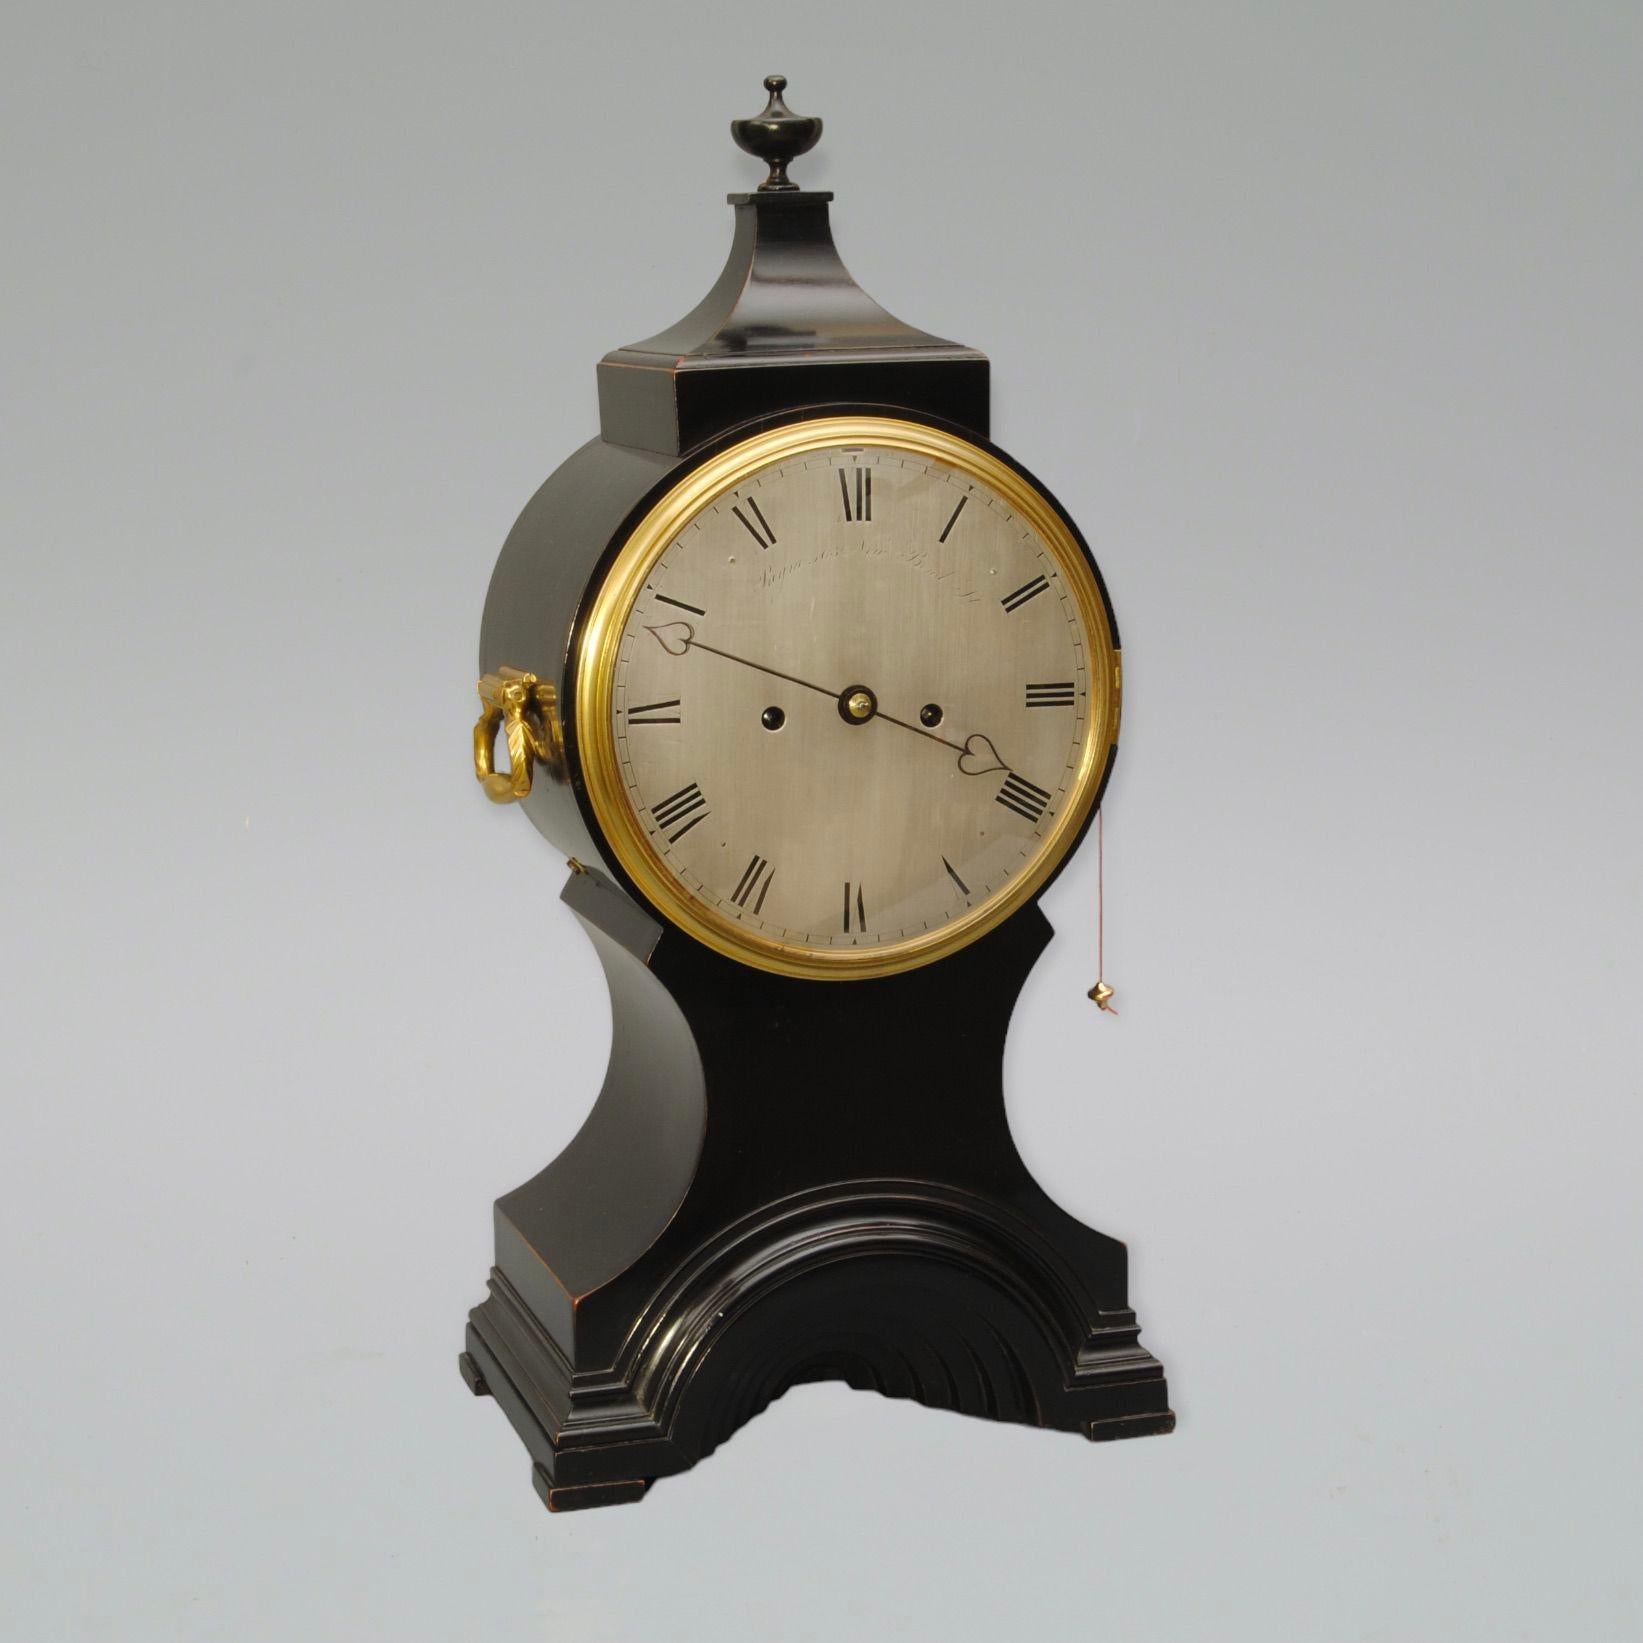 An 8 day ebonised ballon bracket clock by Payne, London. The silvered dial with the original elegant heart shaped hands.
The elegant case has an unusual moulded tunnel design to the base instead of being an open design.
The movement is also signed